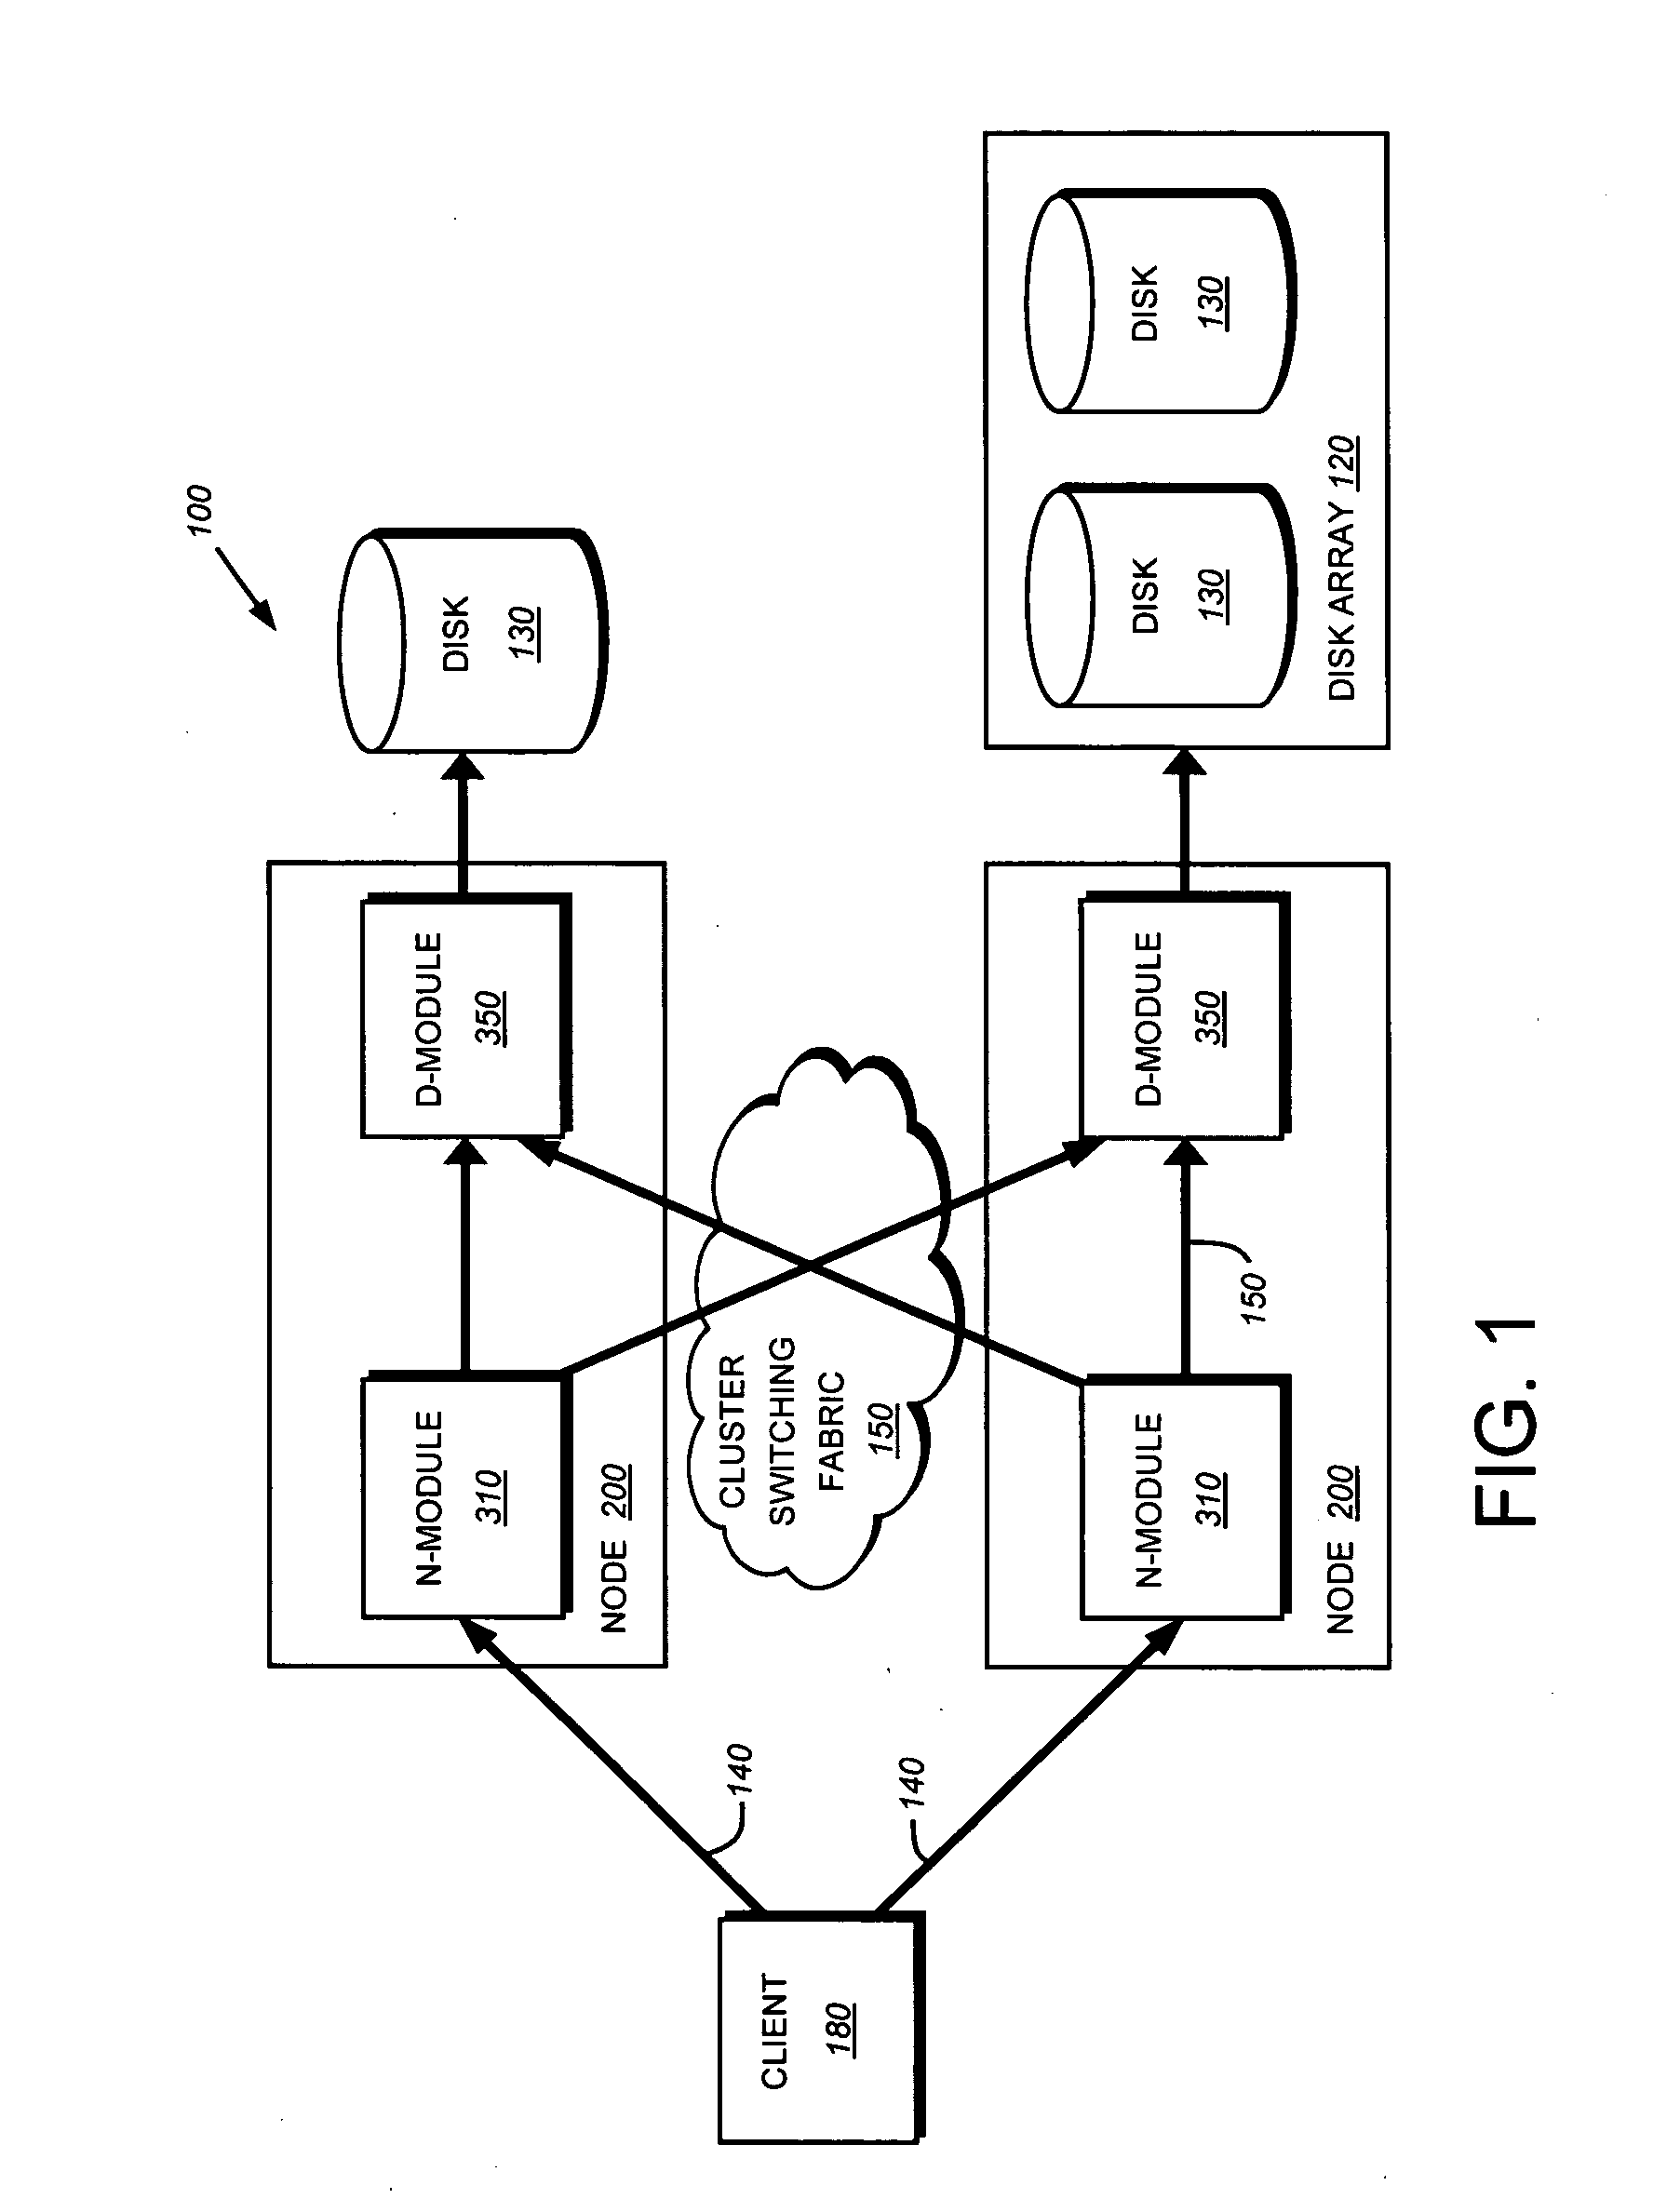 System and method for management of jobs in a cluster environment